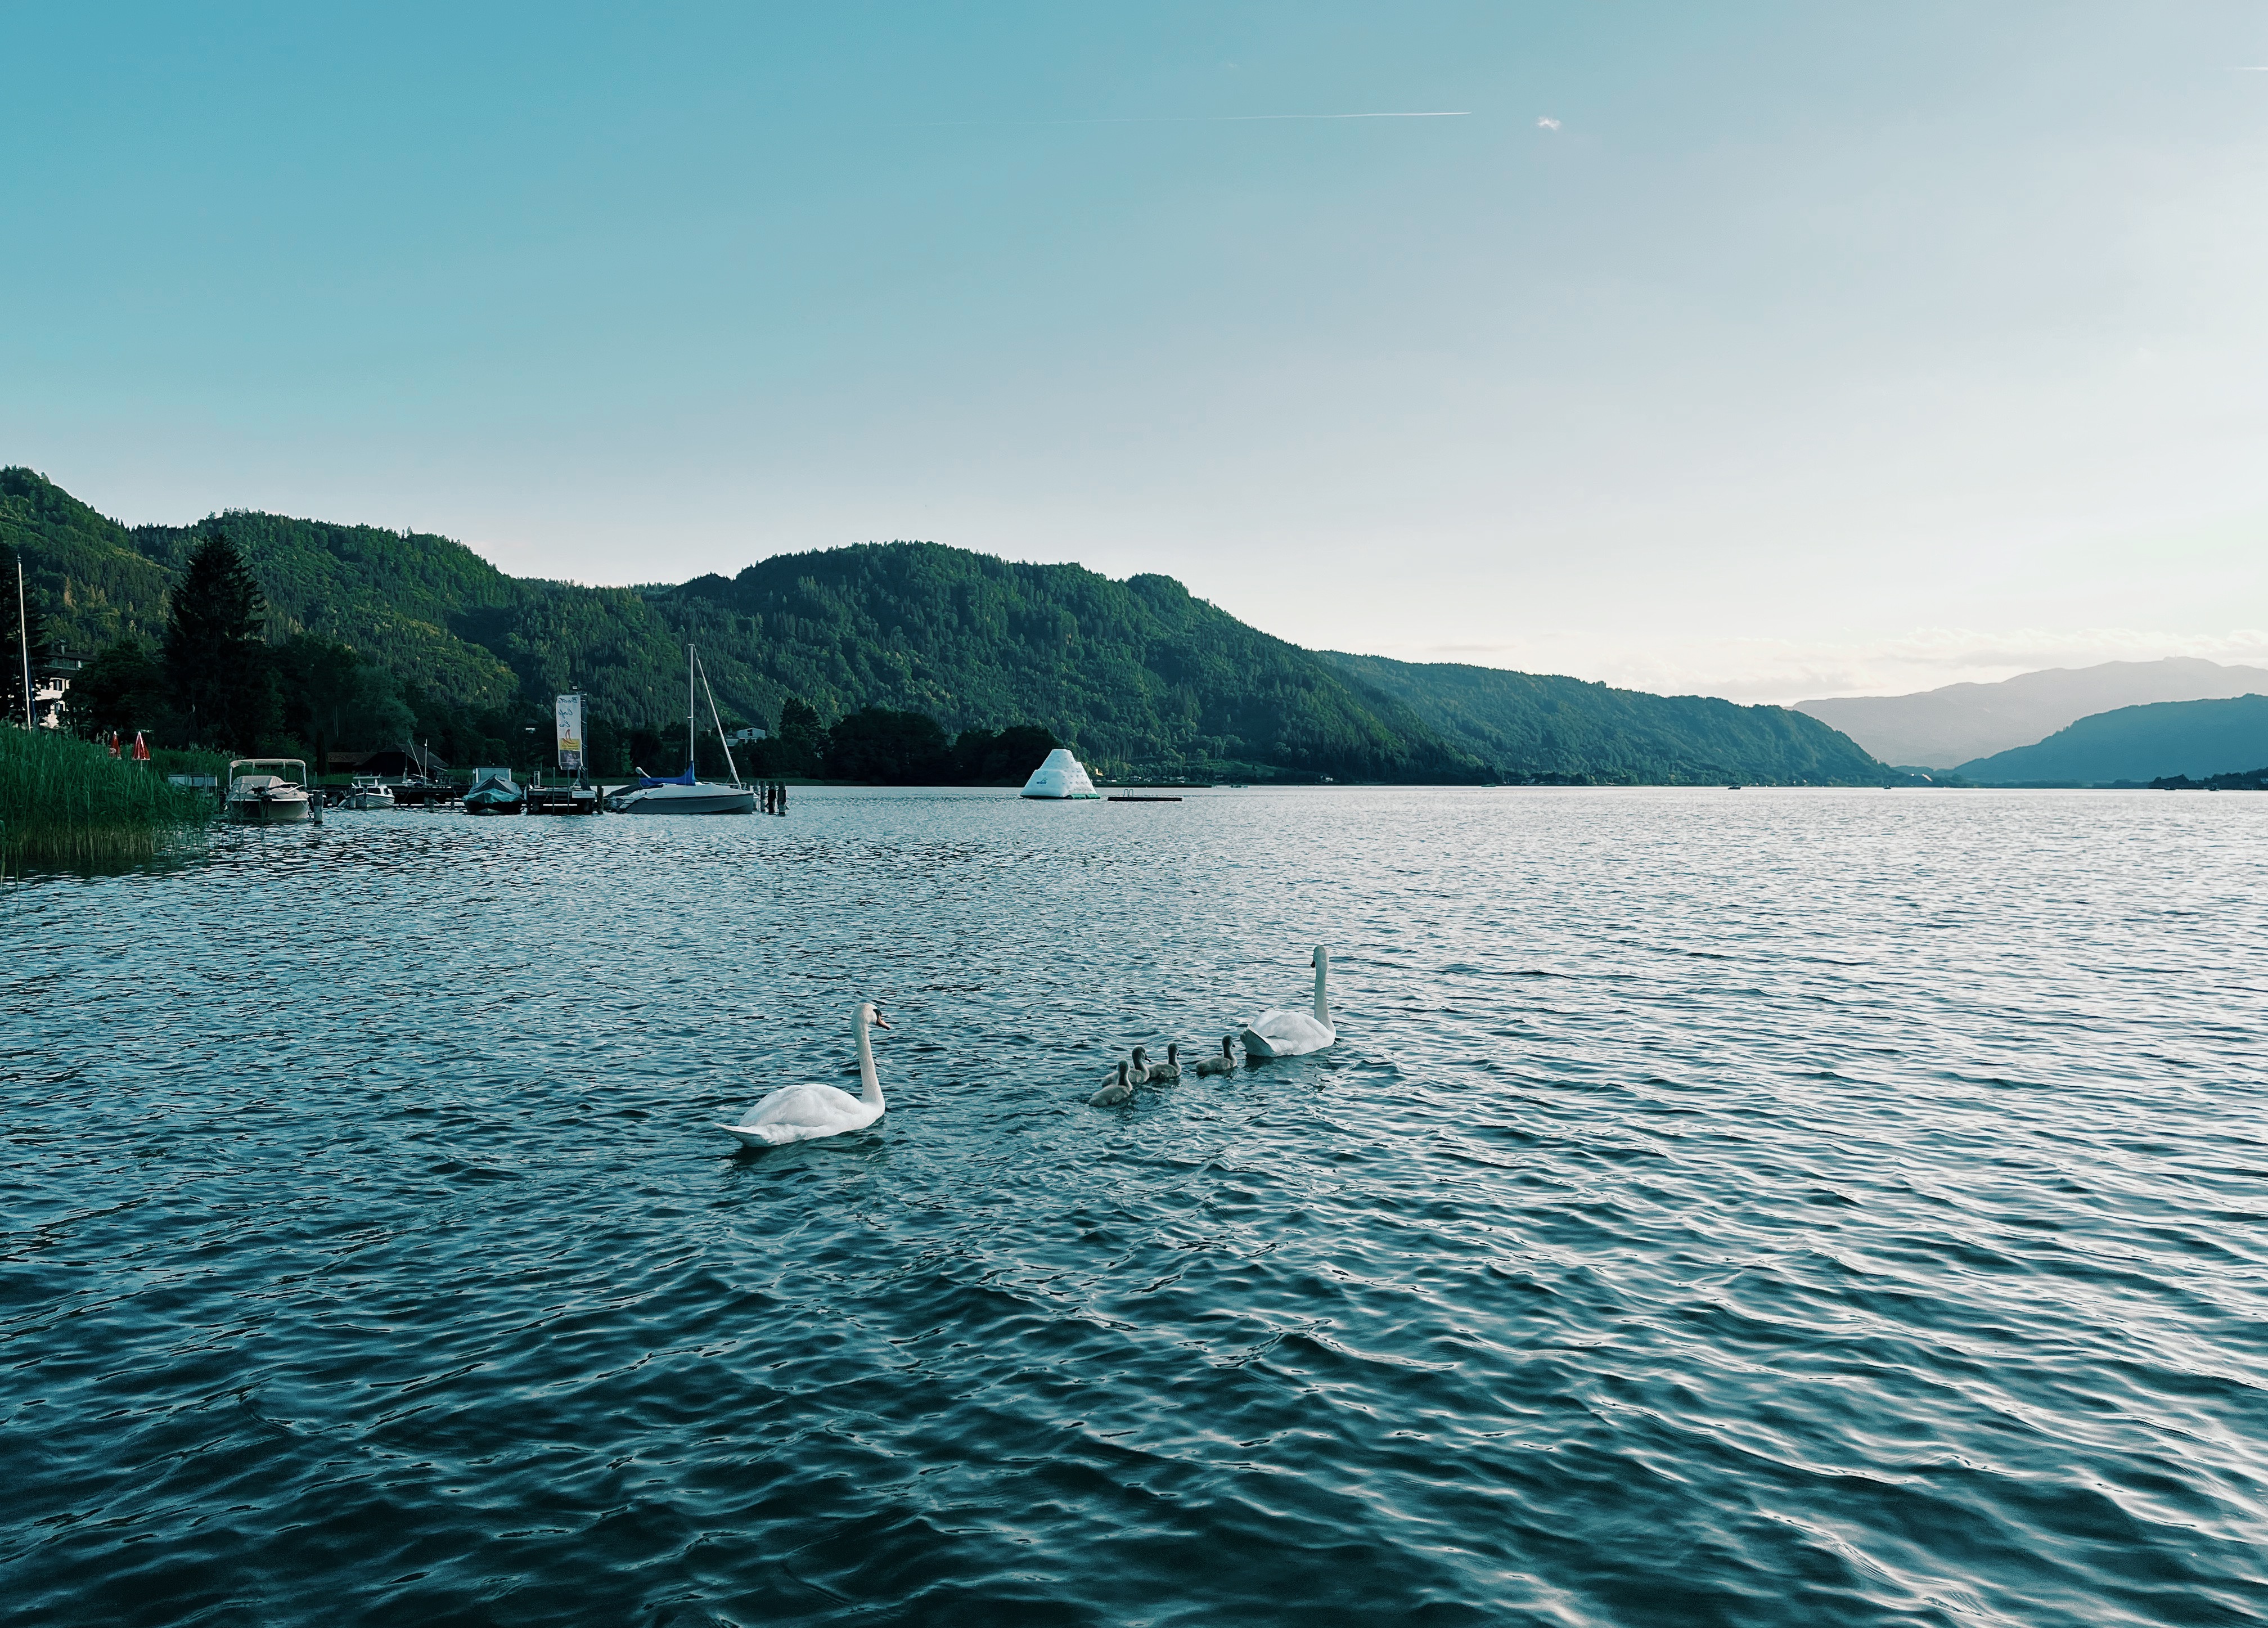 Swans swimming on Lake Ossiach in Austria